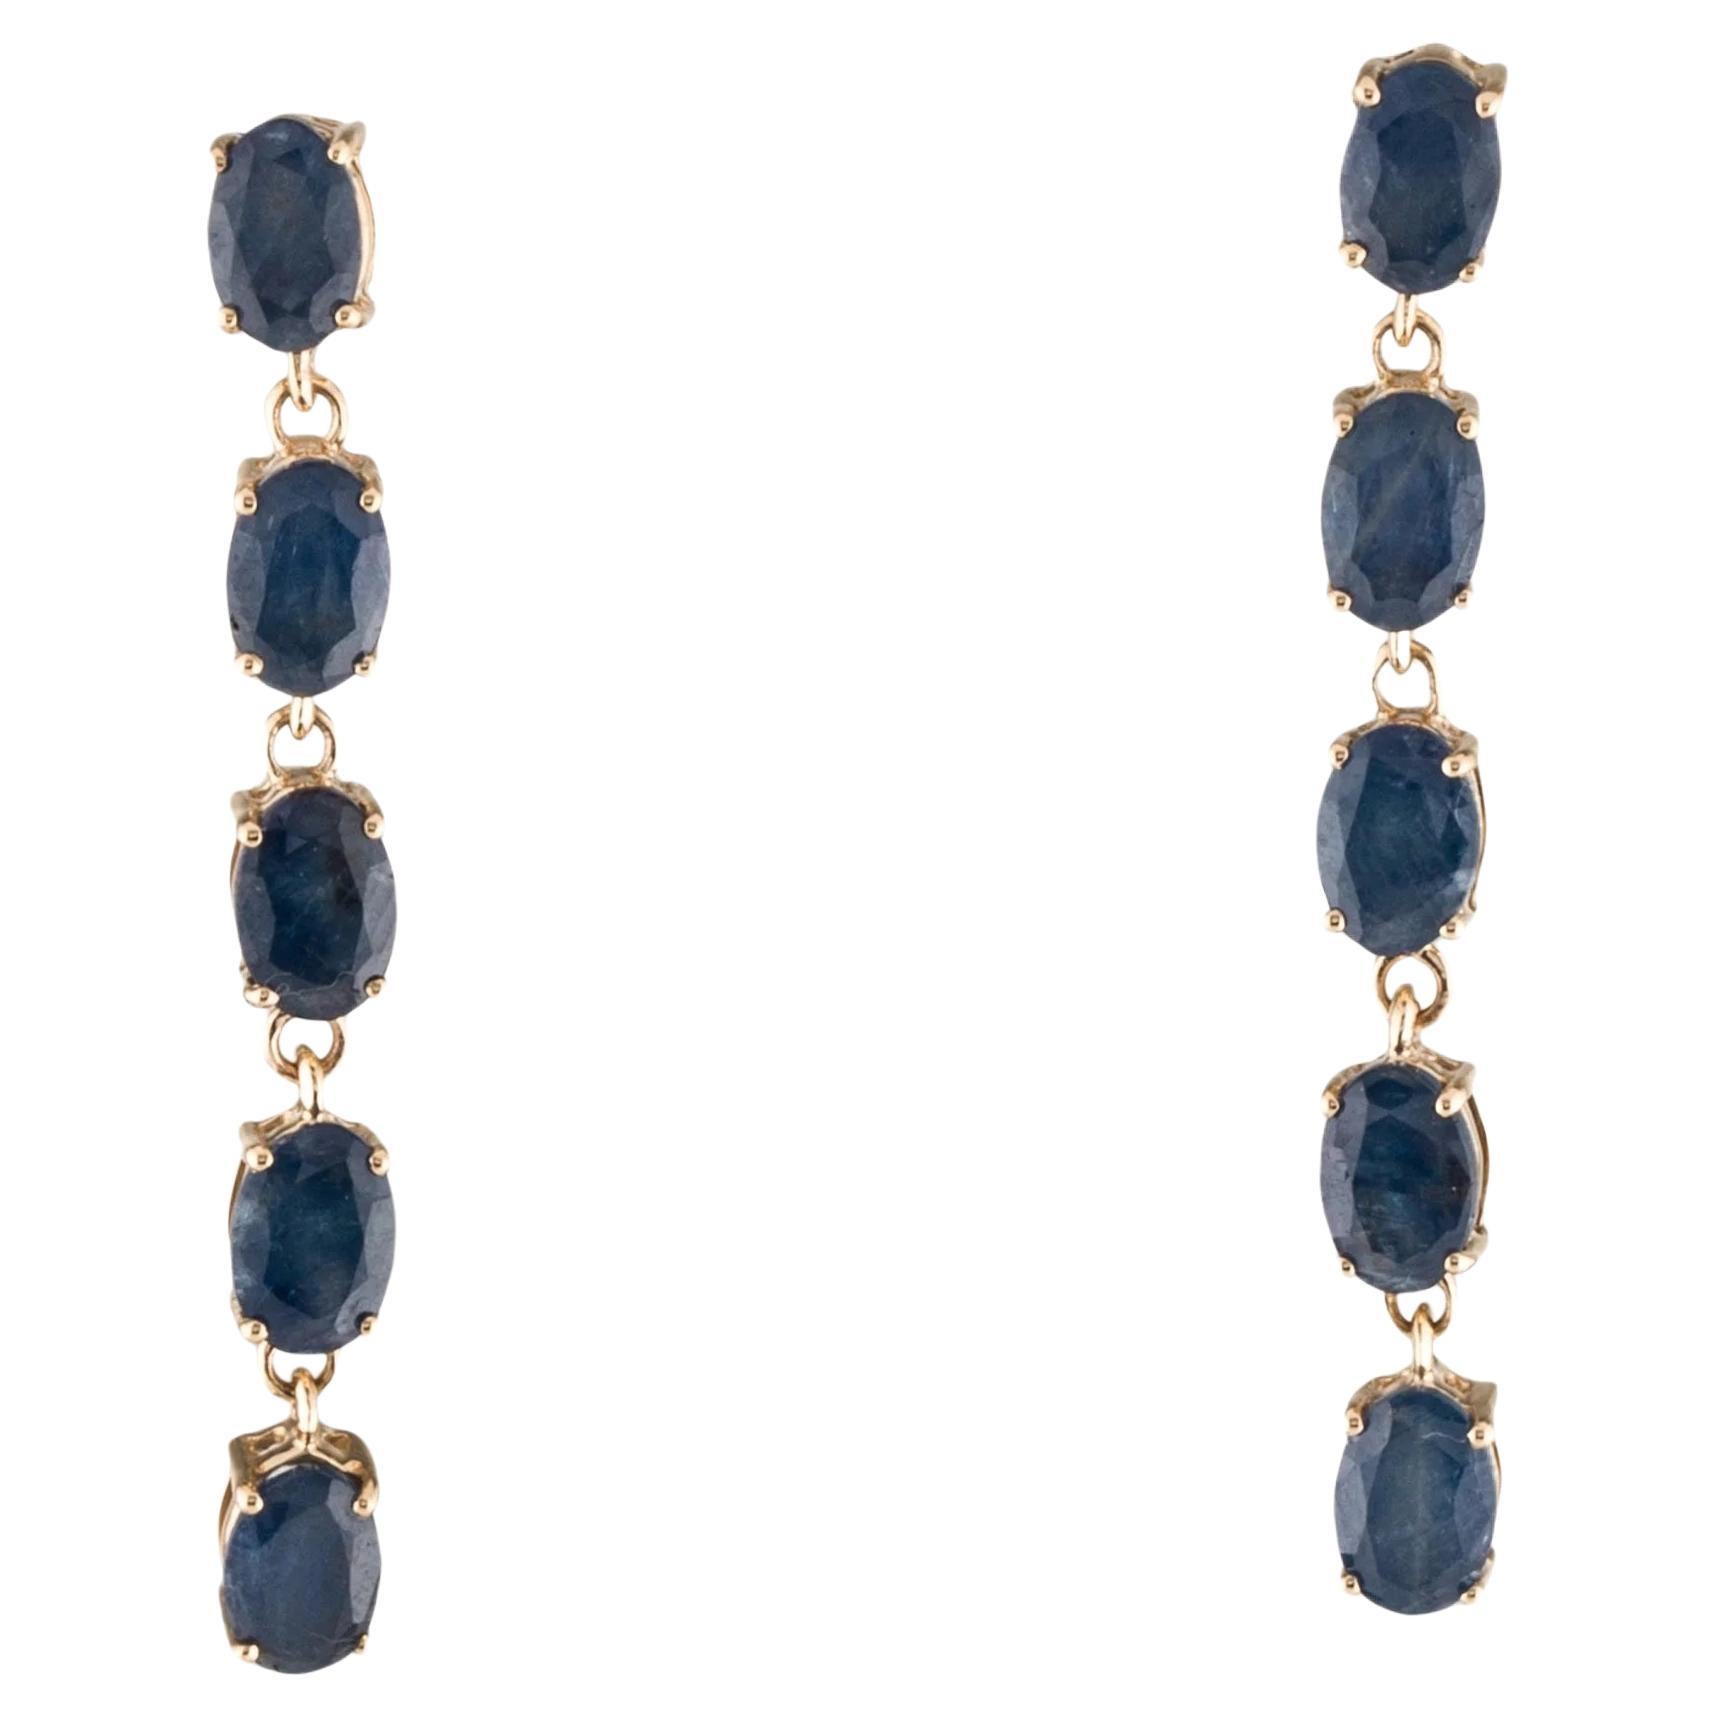 Luxurious 14K Yellow Gold Earrings with 6.11 Carat Oval Brilliant Blue Sapphire For Sale